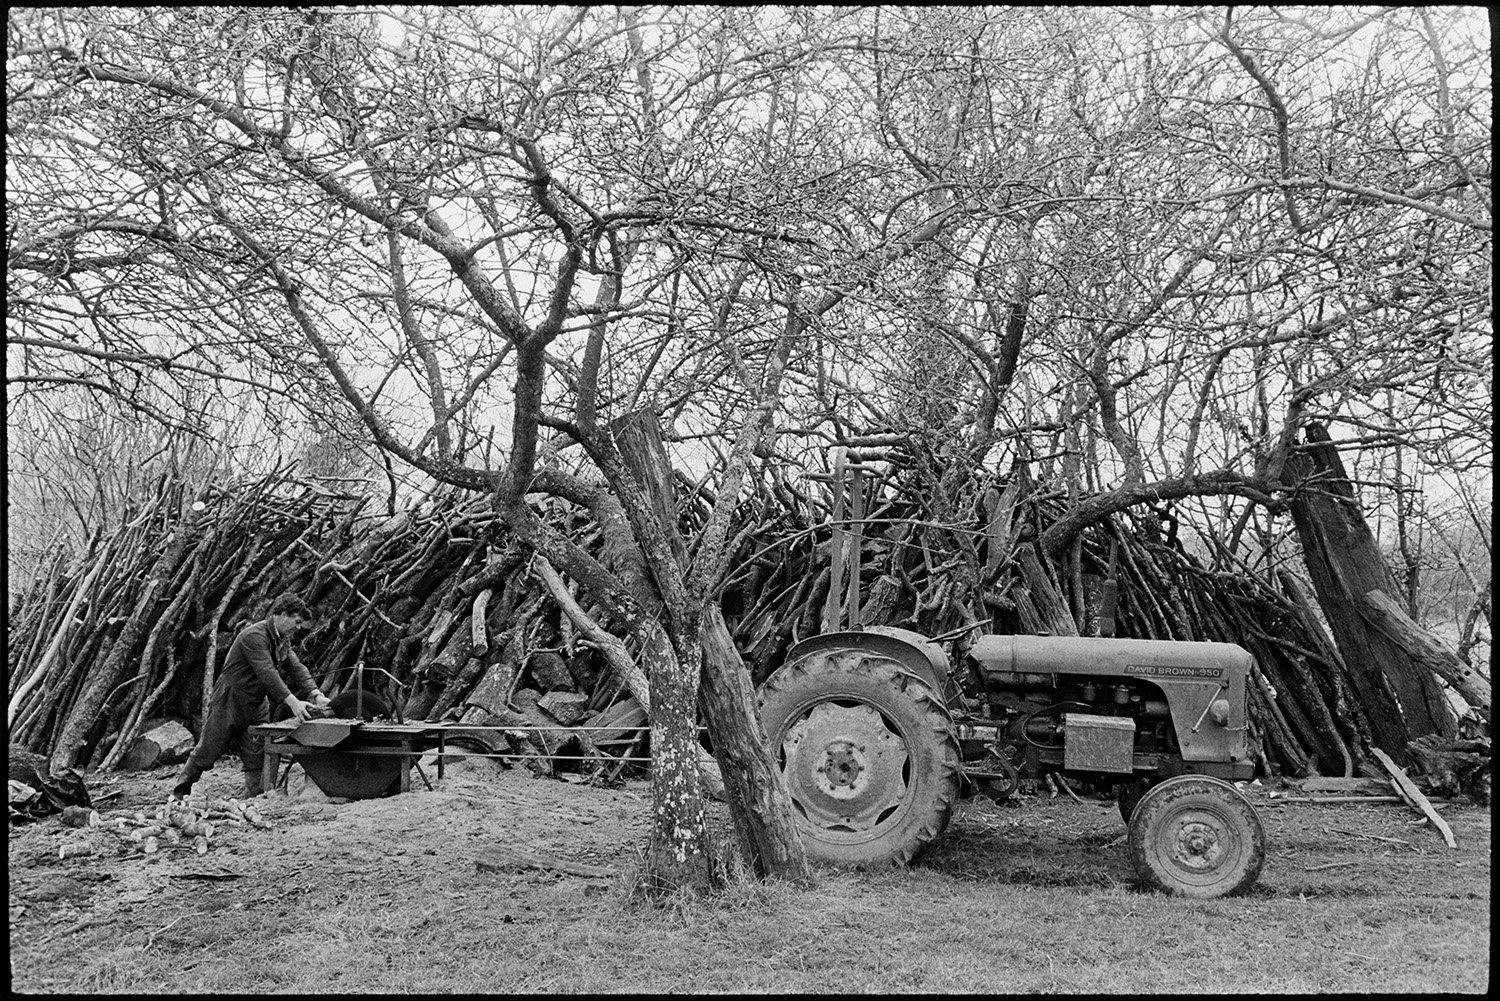 Farmer sawing logs on circular saw, woodpile in orchard. 
[Morley King sawing logs on a circular saw in an orchard at Middle Week, Iddesleigh. He is using a tractor with a pulley to drive the saw. A large woodpile is visible in the background.]